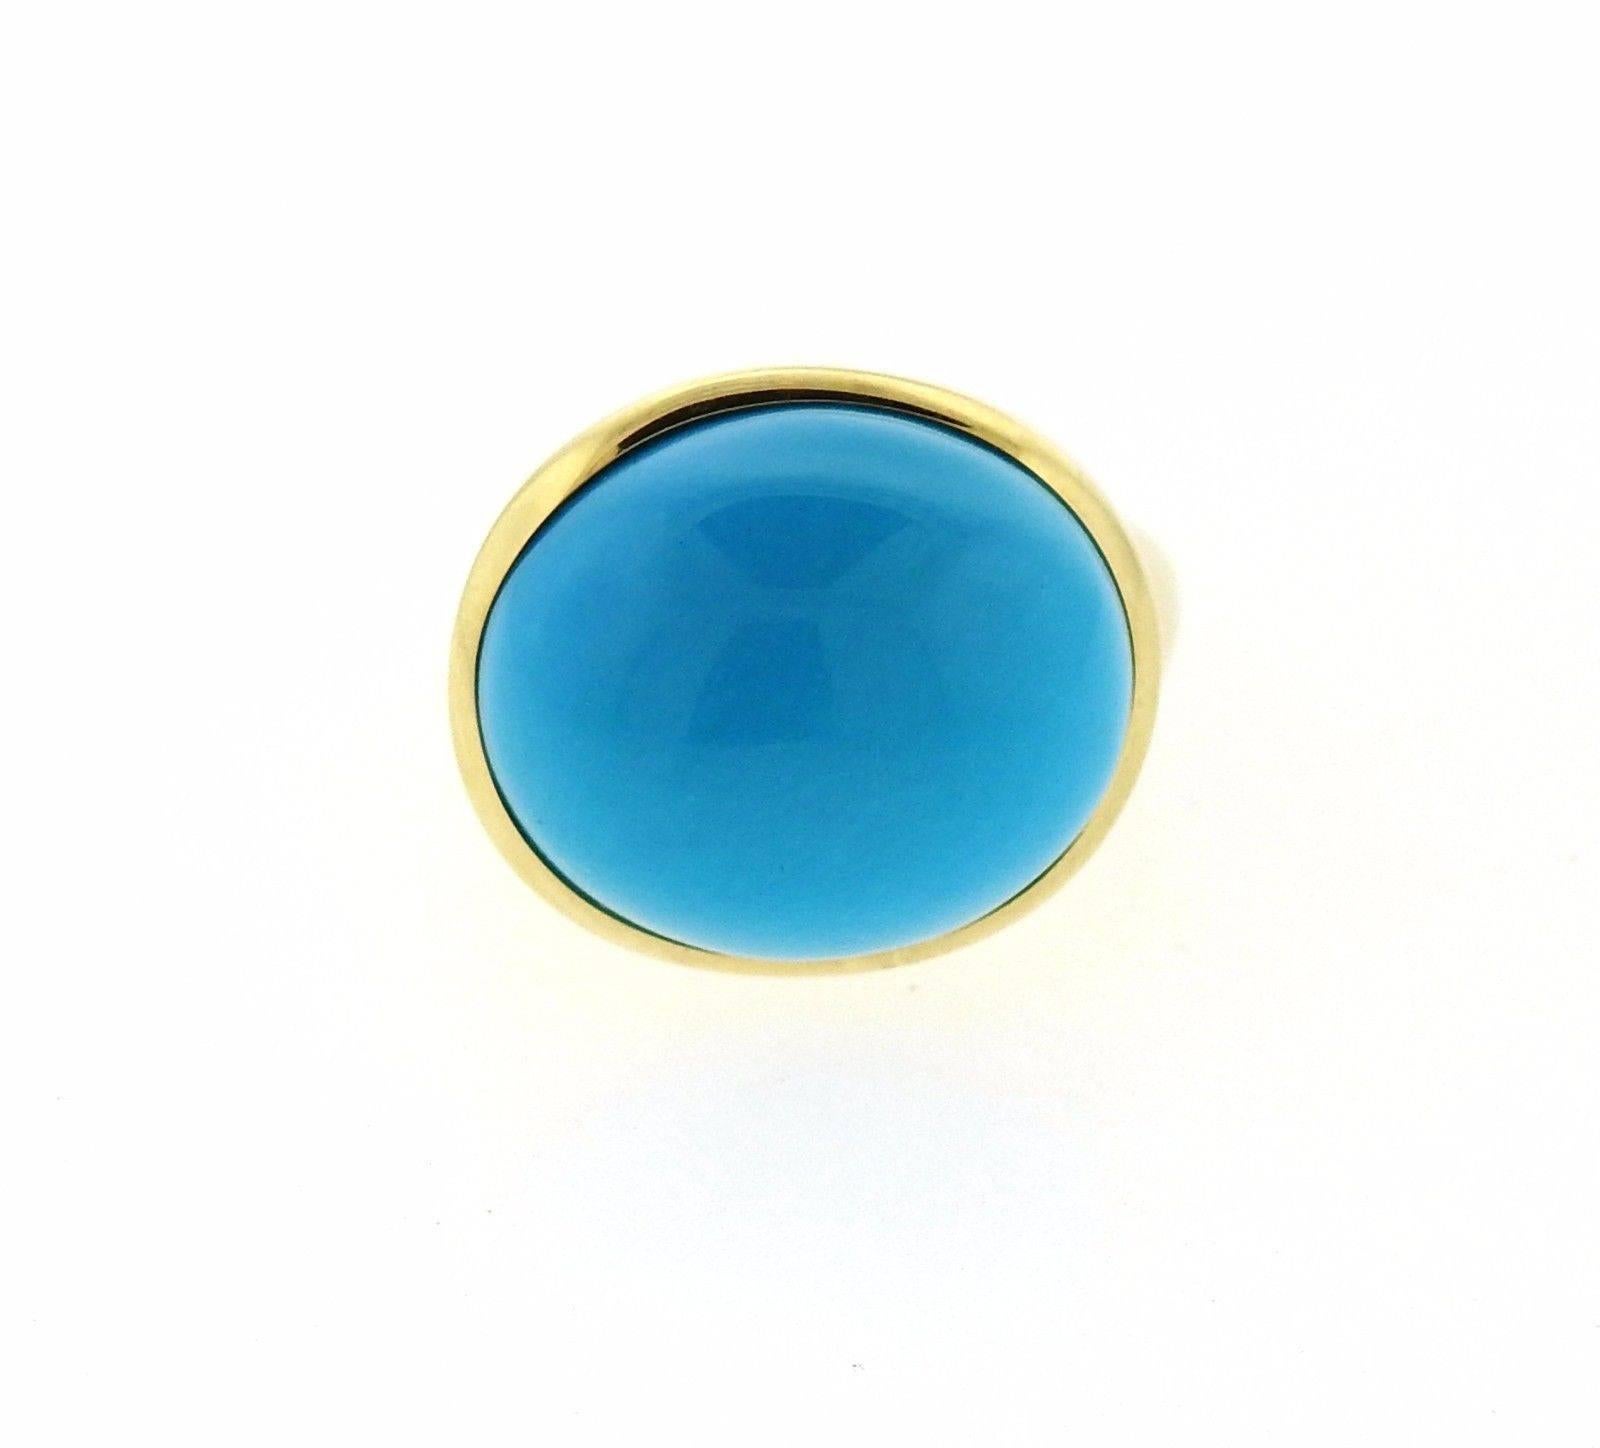 An 18k yellow gold ring set with a 19mm turquoise.  The ring is a size 7.  The ring top is 18mm x 21mm and sits approximately 16mm from the finger.  The weight of the piece is 19 grams.  Marked: Tiffany & Co, Elsa Peretti, 750, Hong Kong.  Comes